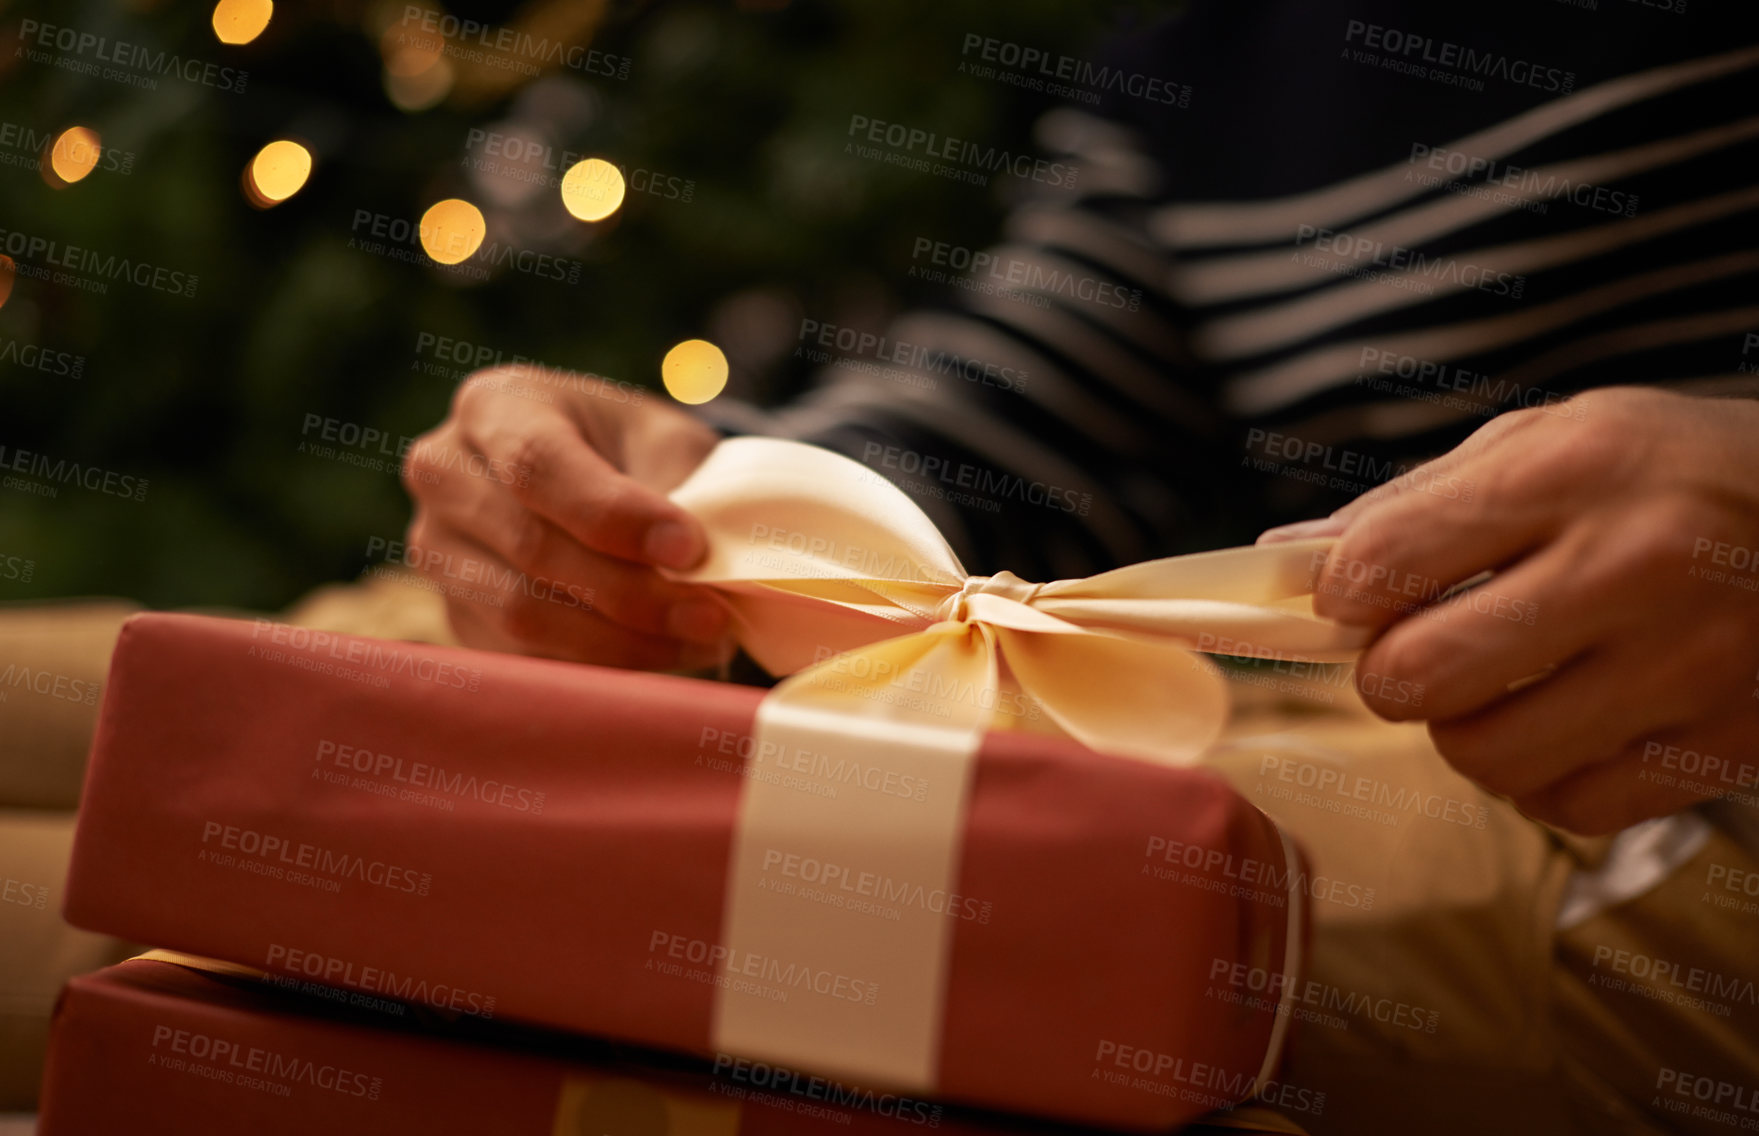 Buy stock photo Shot of a handsome young man getting ready for Christmas